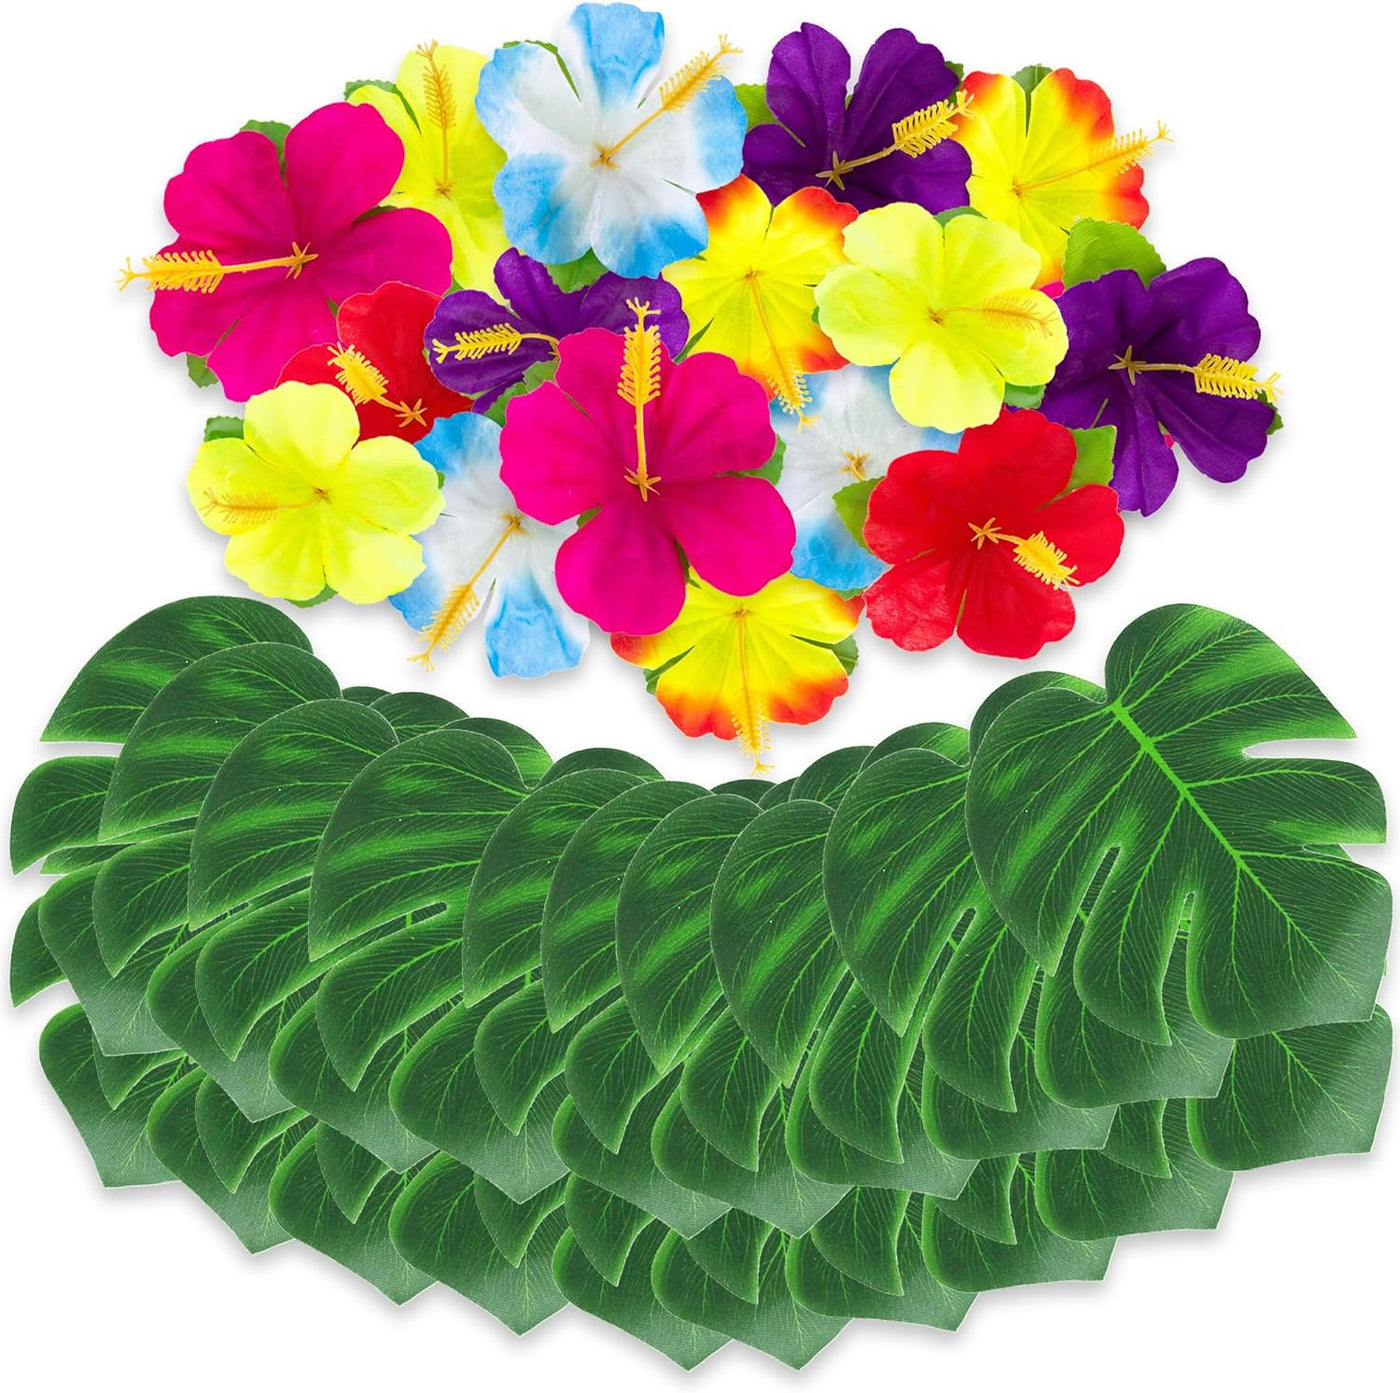 ArtCreativity Hawaiian Flower Luau Decorations - 60-PC Set with 36 Palm Leaves and 24 Artificial Hibiscus Flowers - Tropical Party Decor and Accessories for Birthday Party - Flower Decorations